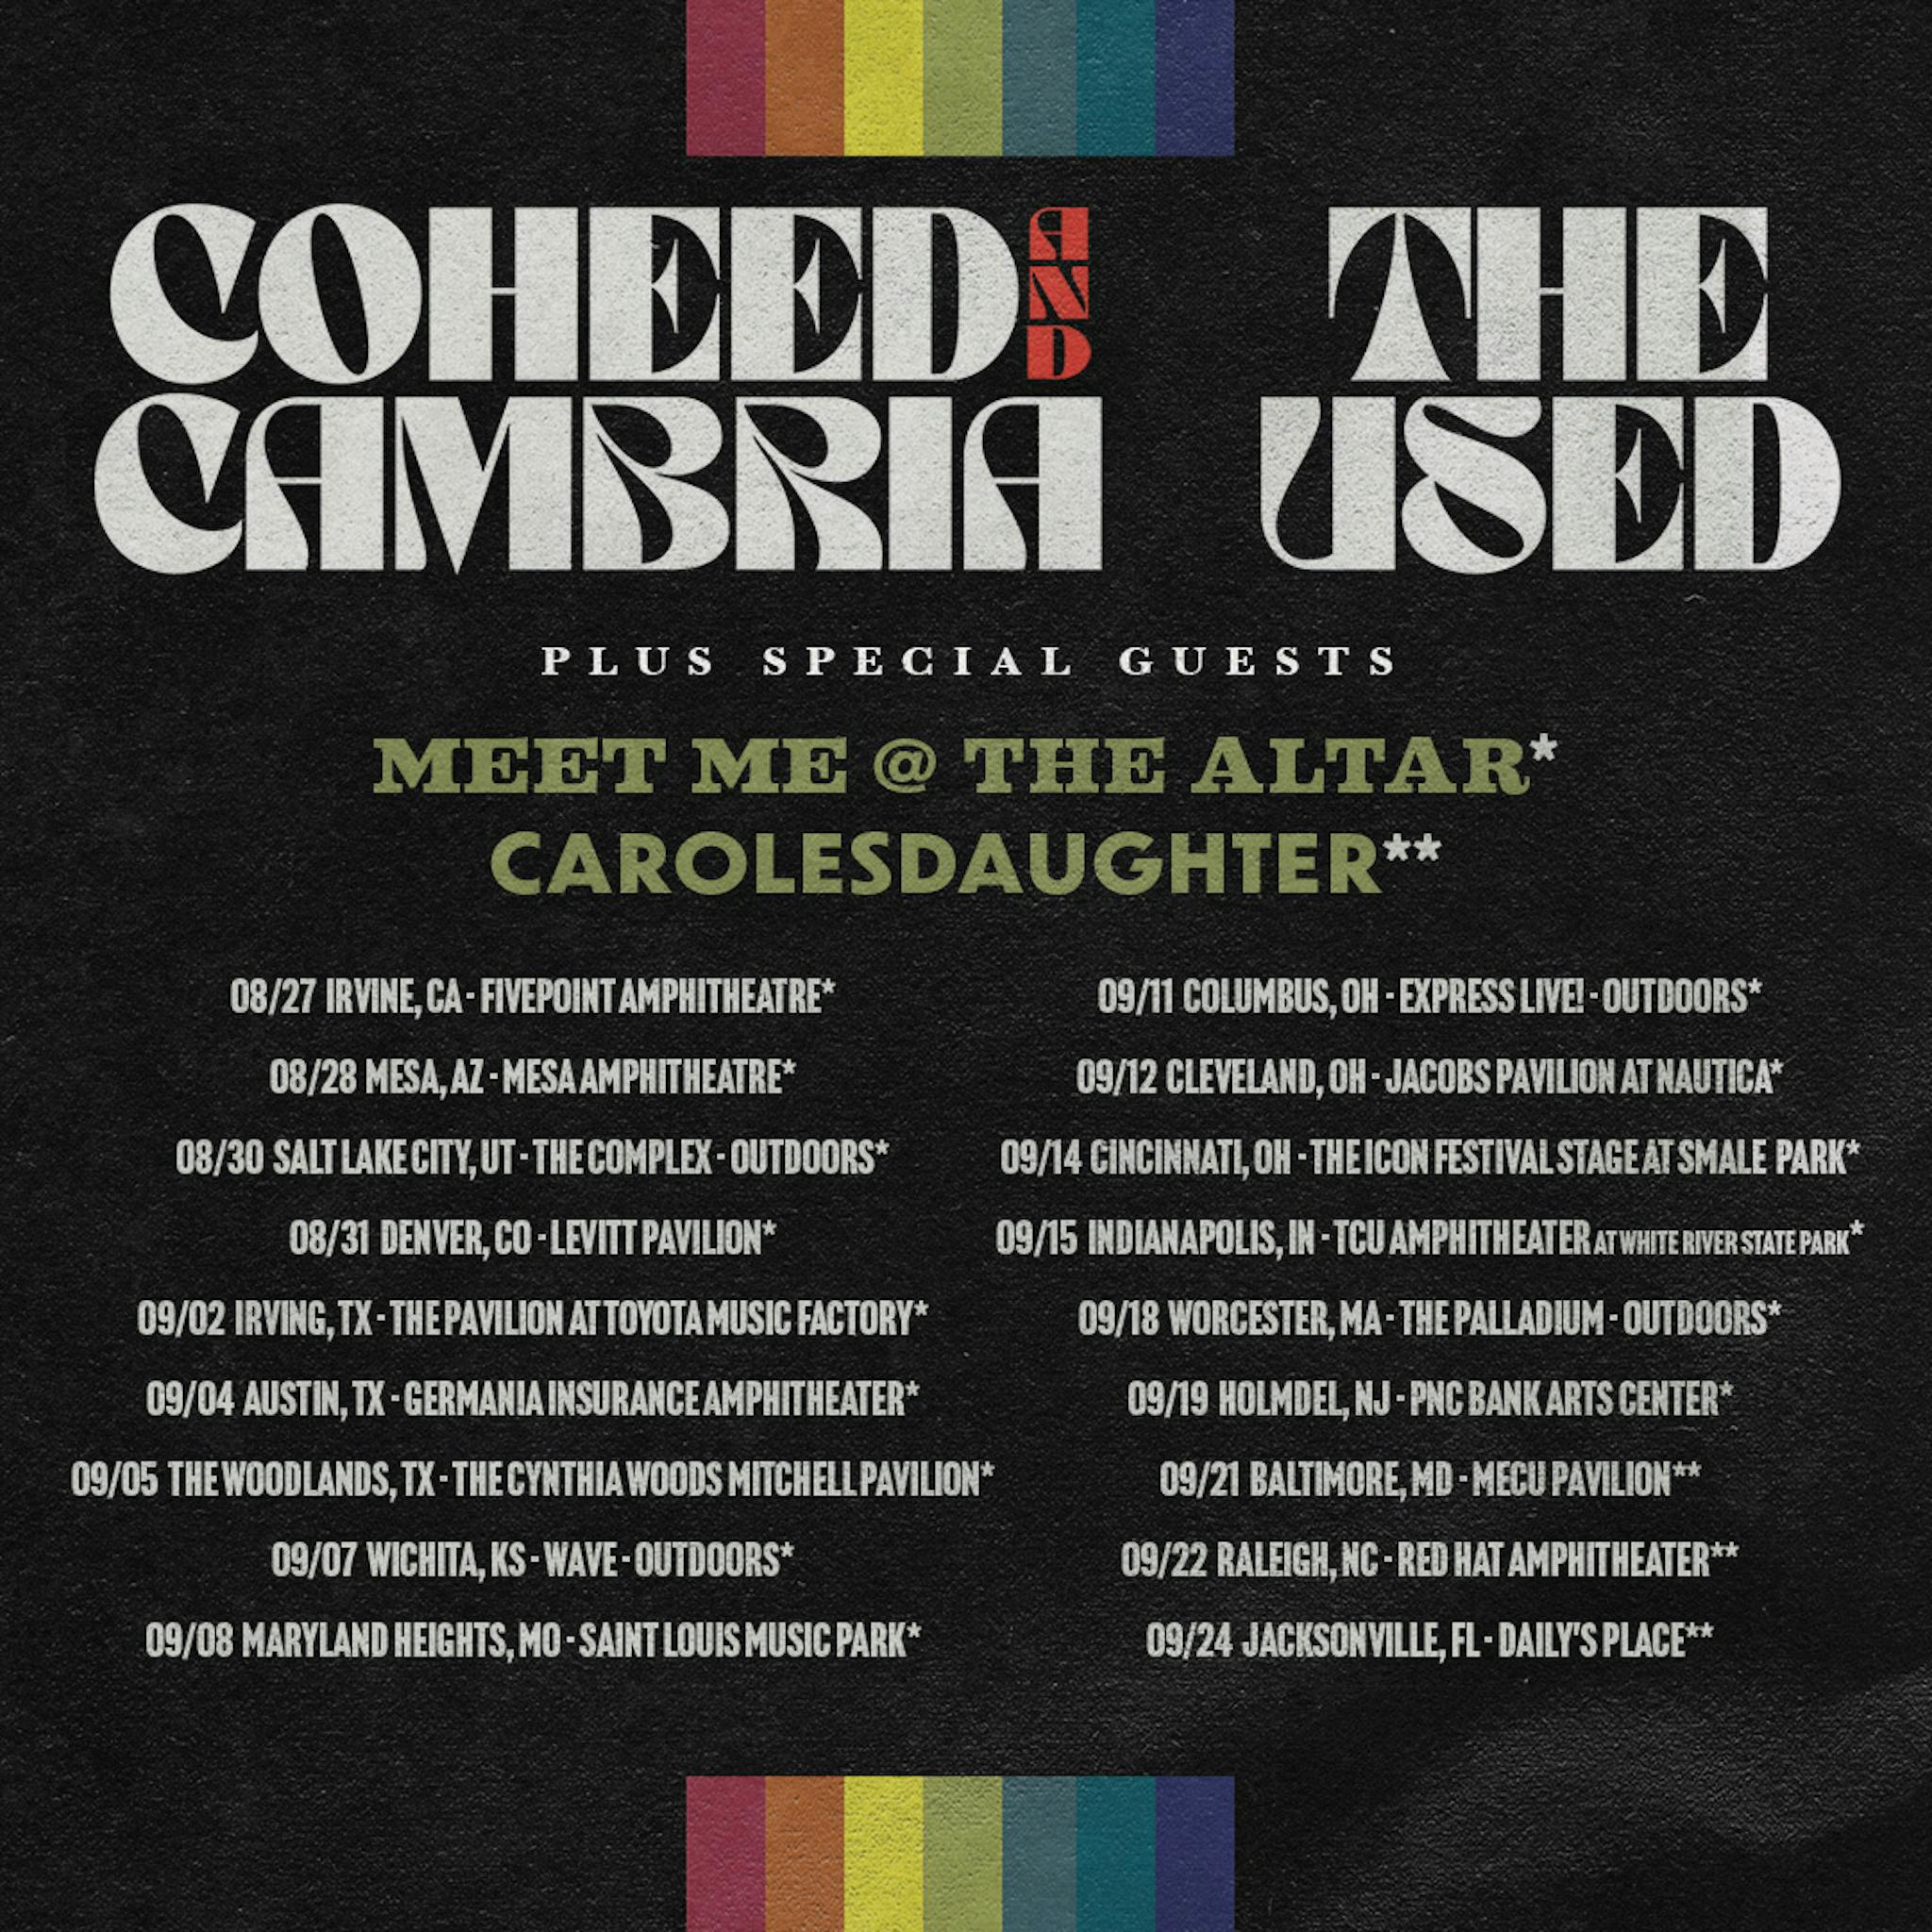 Coheed And Cambria The Used U S tour August September 2021